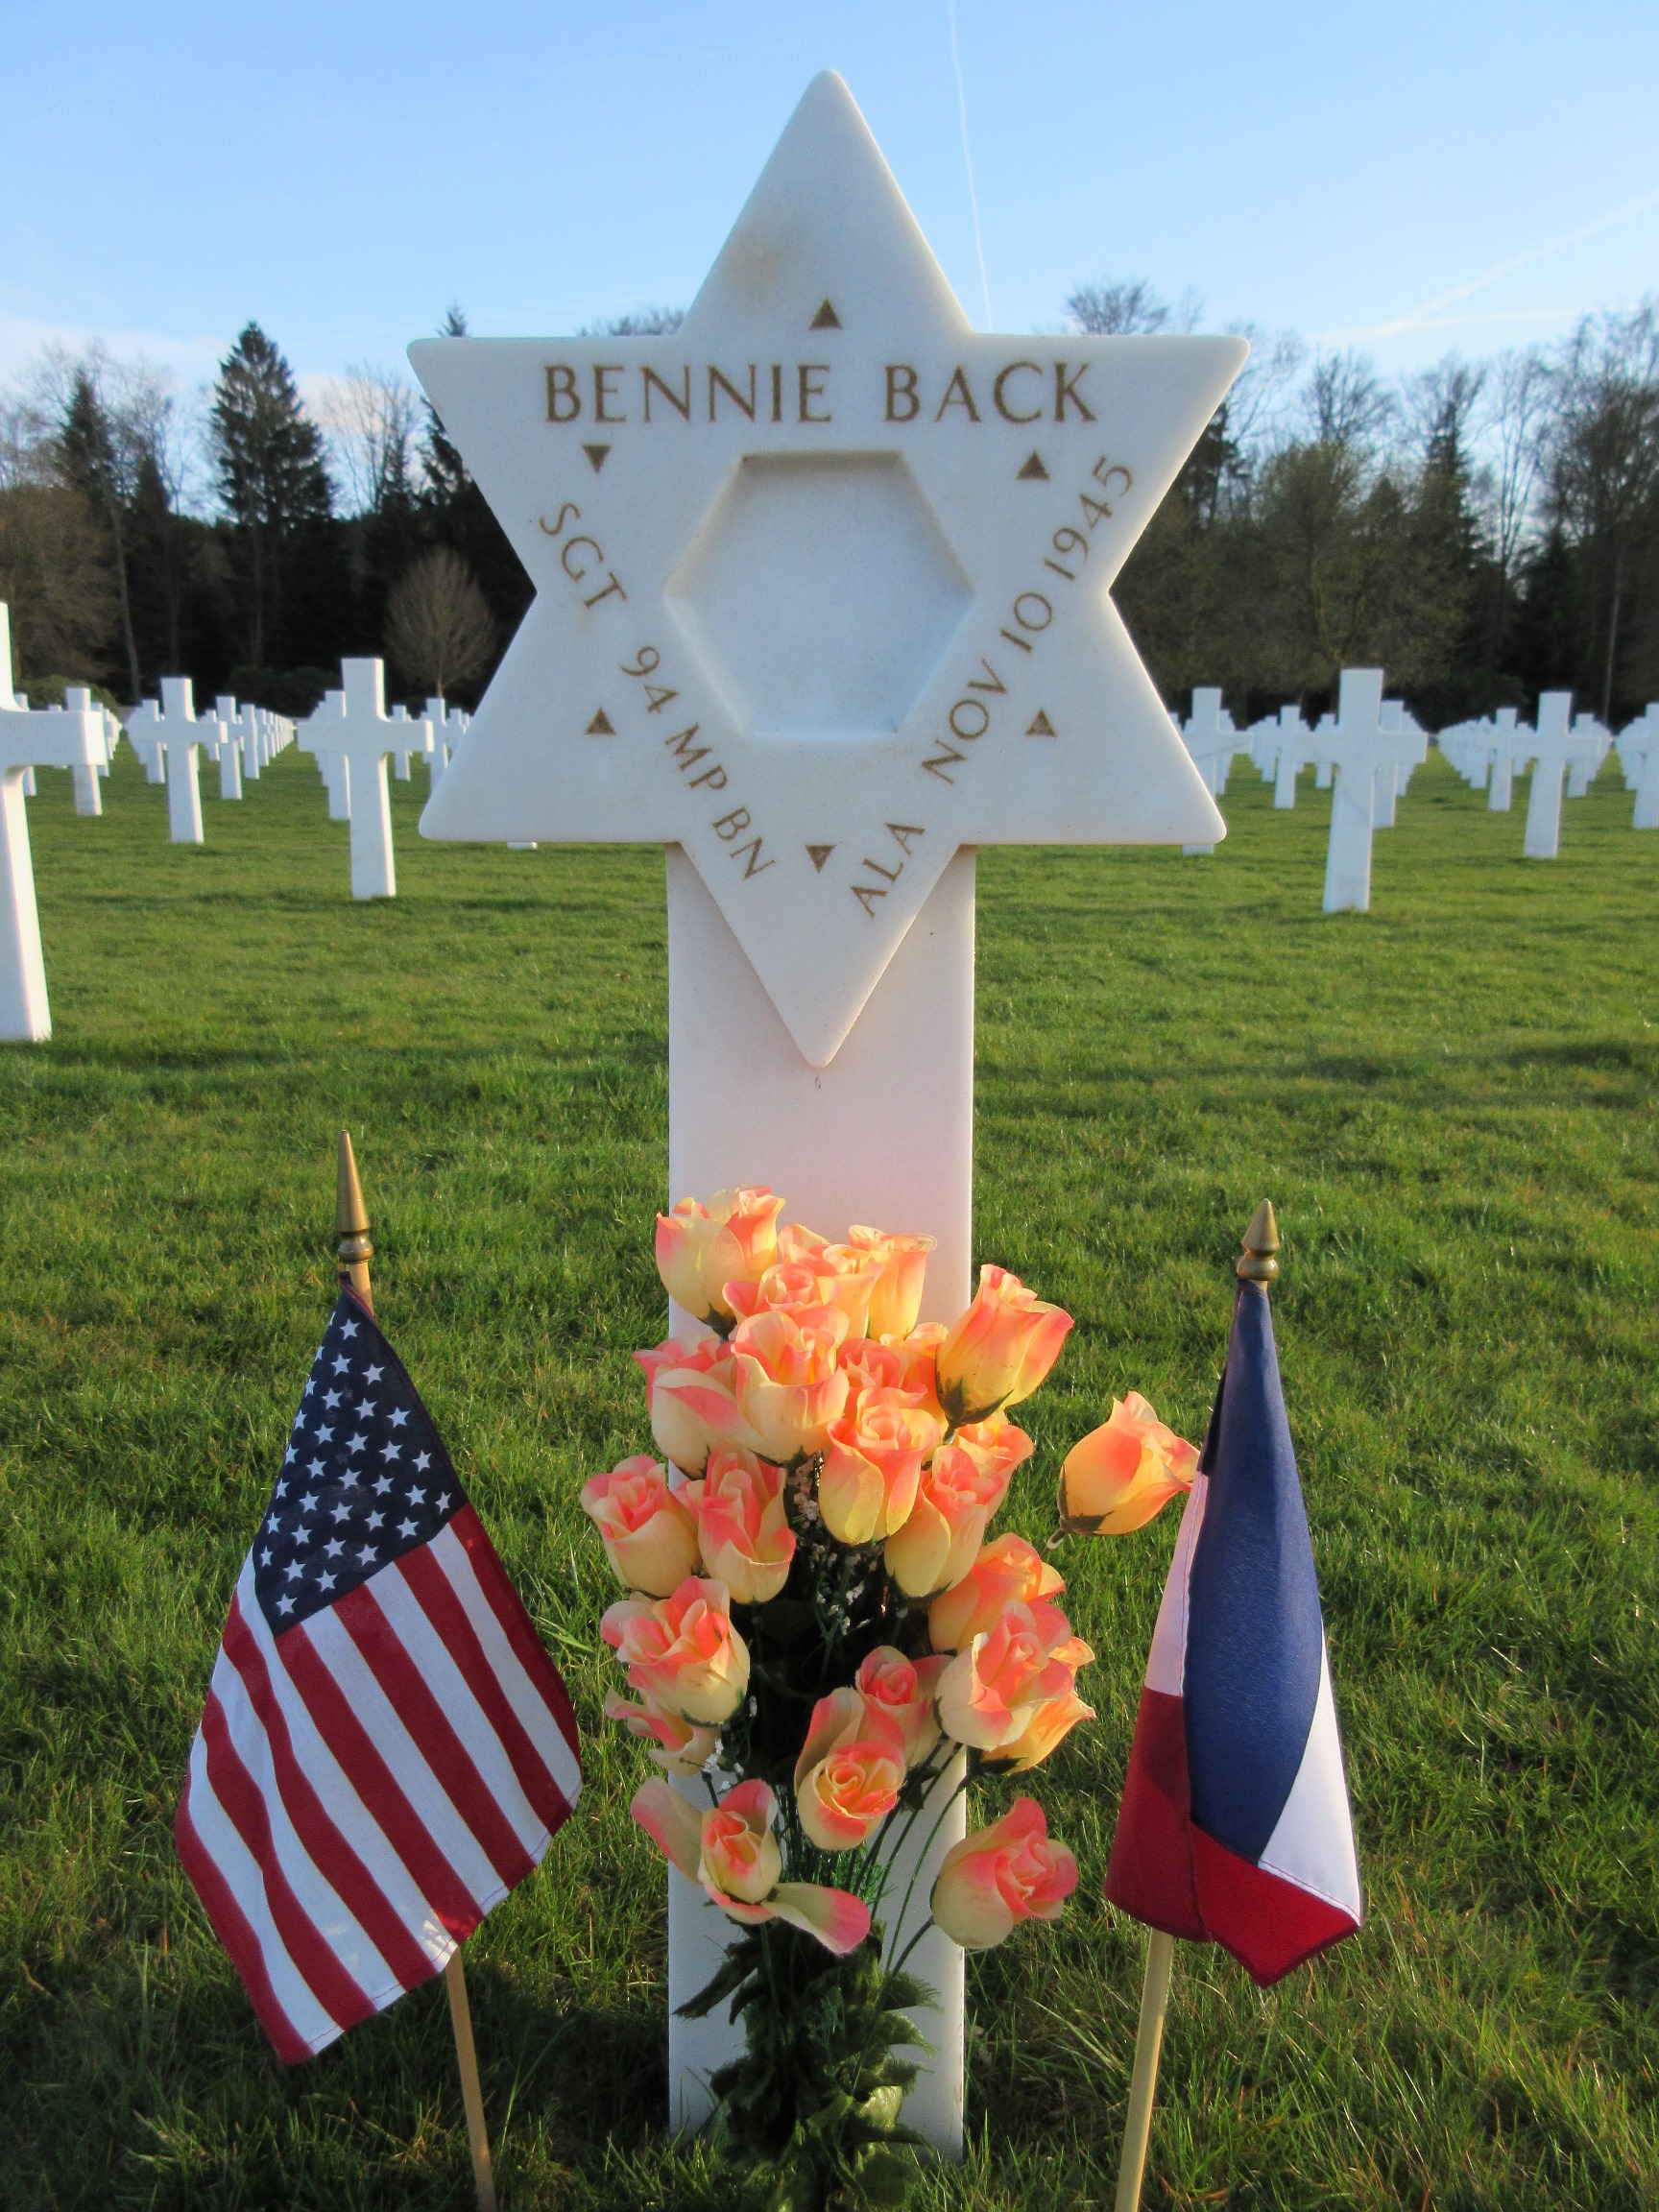 Sergeant Bennie Back | United States Army Military Police Corps, U.S. Government